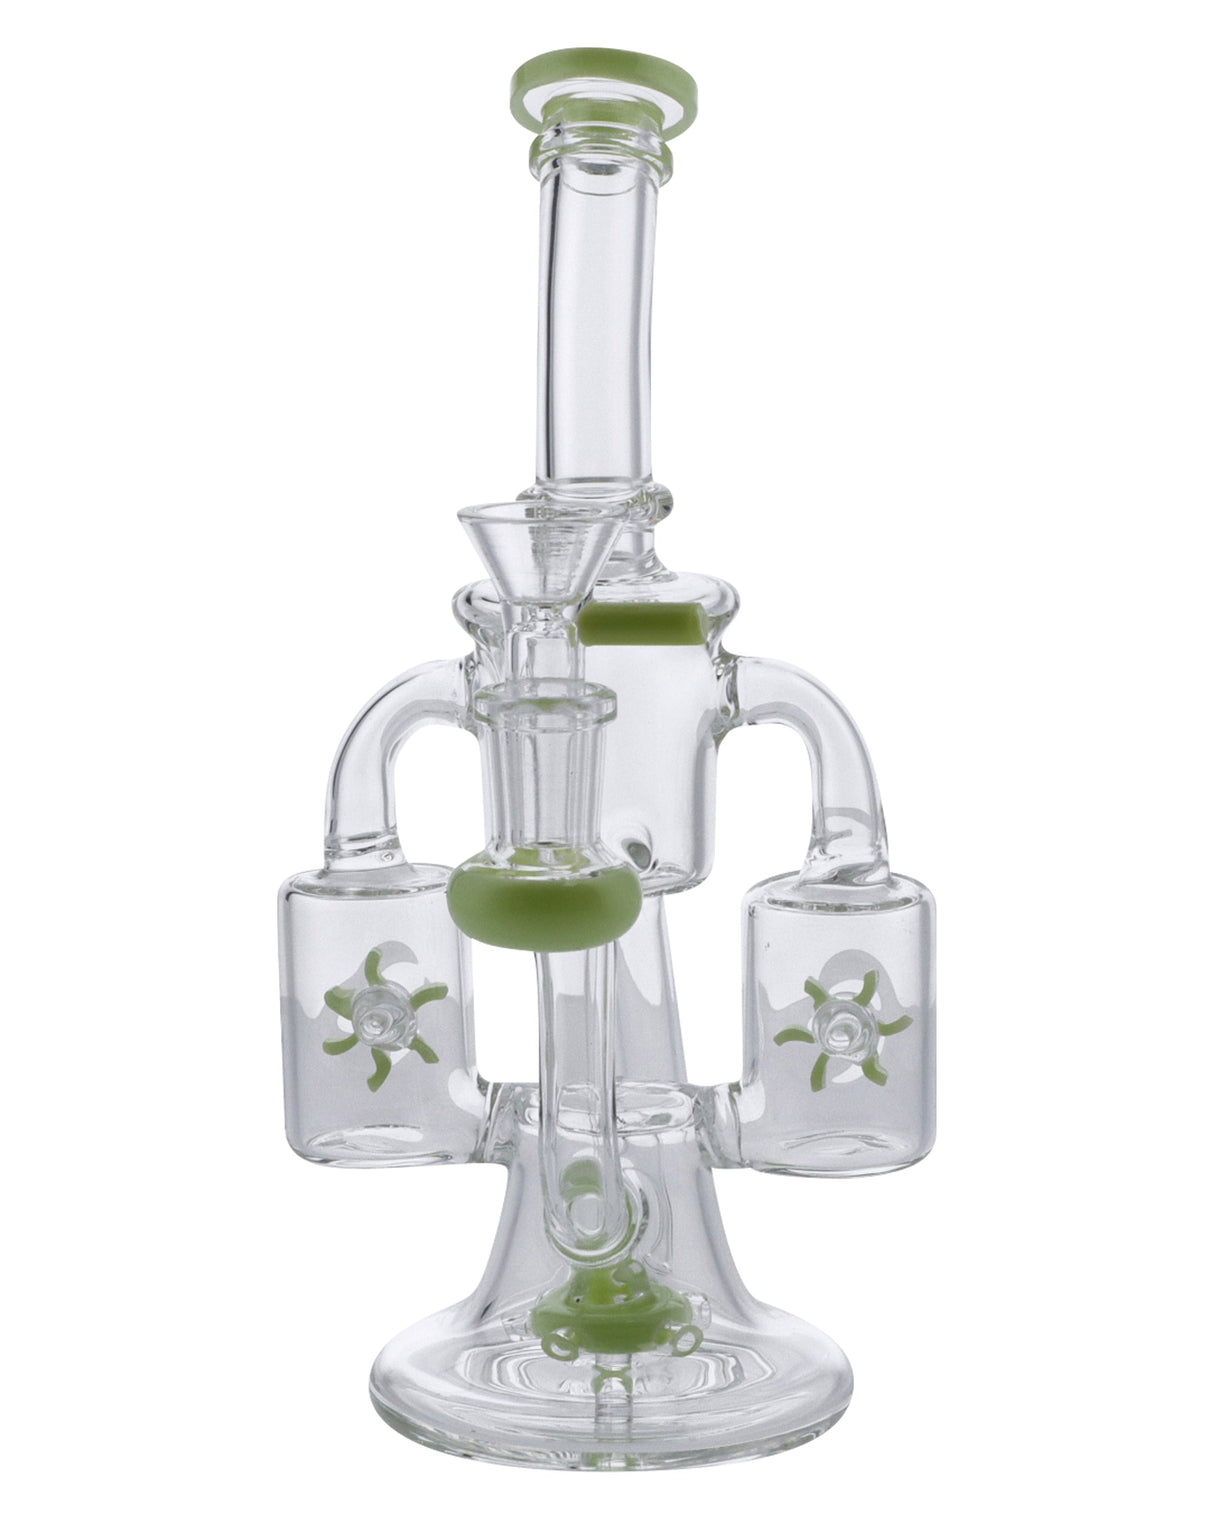 Milky Green Borosilicate Glass Water Pipe with Quartz Nail & Bowl by Valiant Distribution